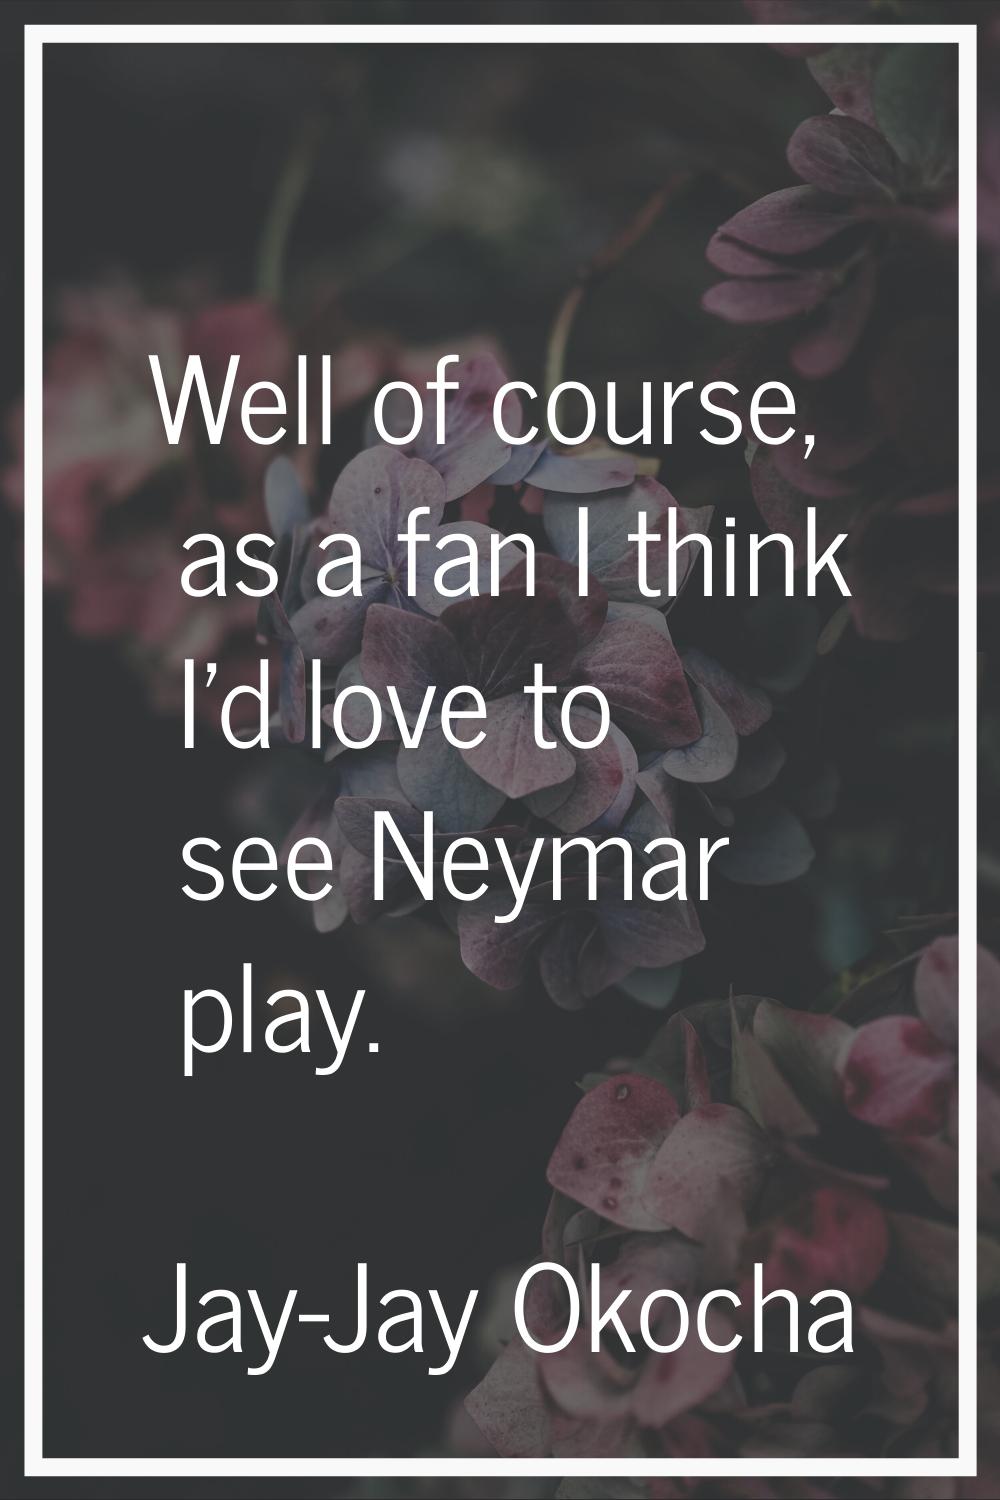 Well of course, as a fan I think I'd love to see Neymar play.